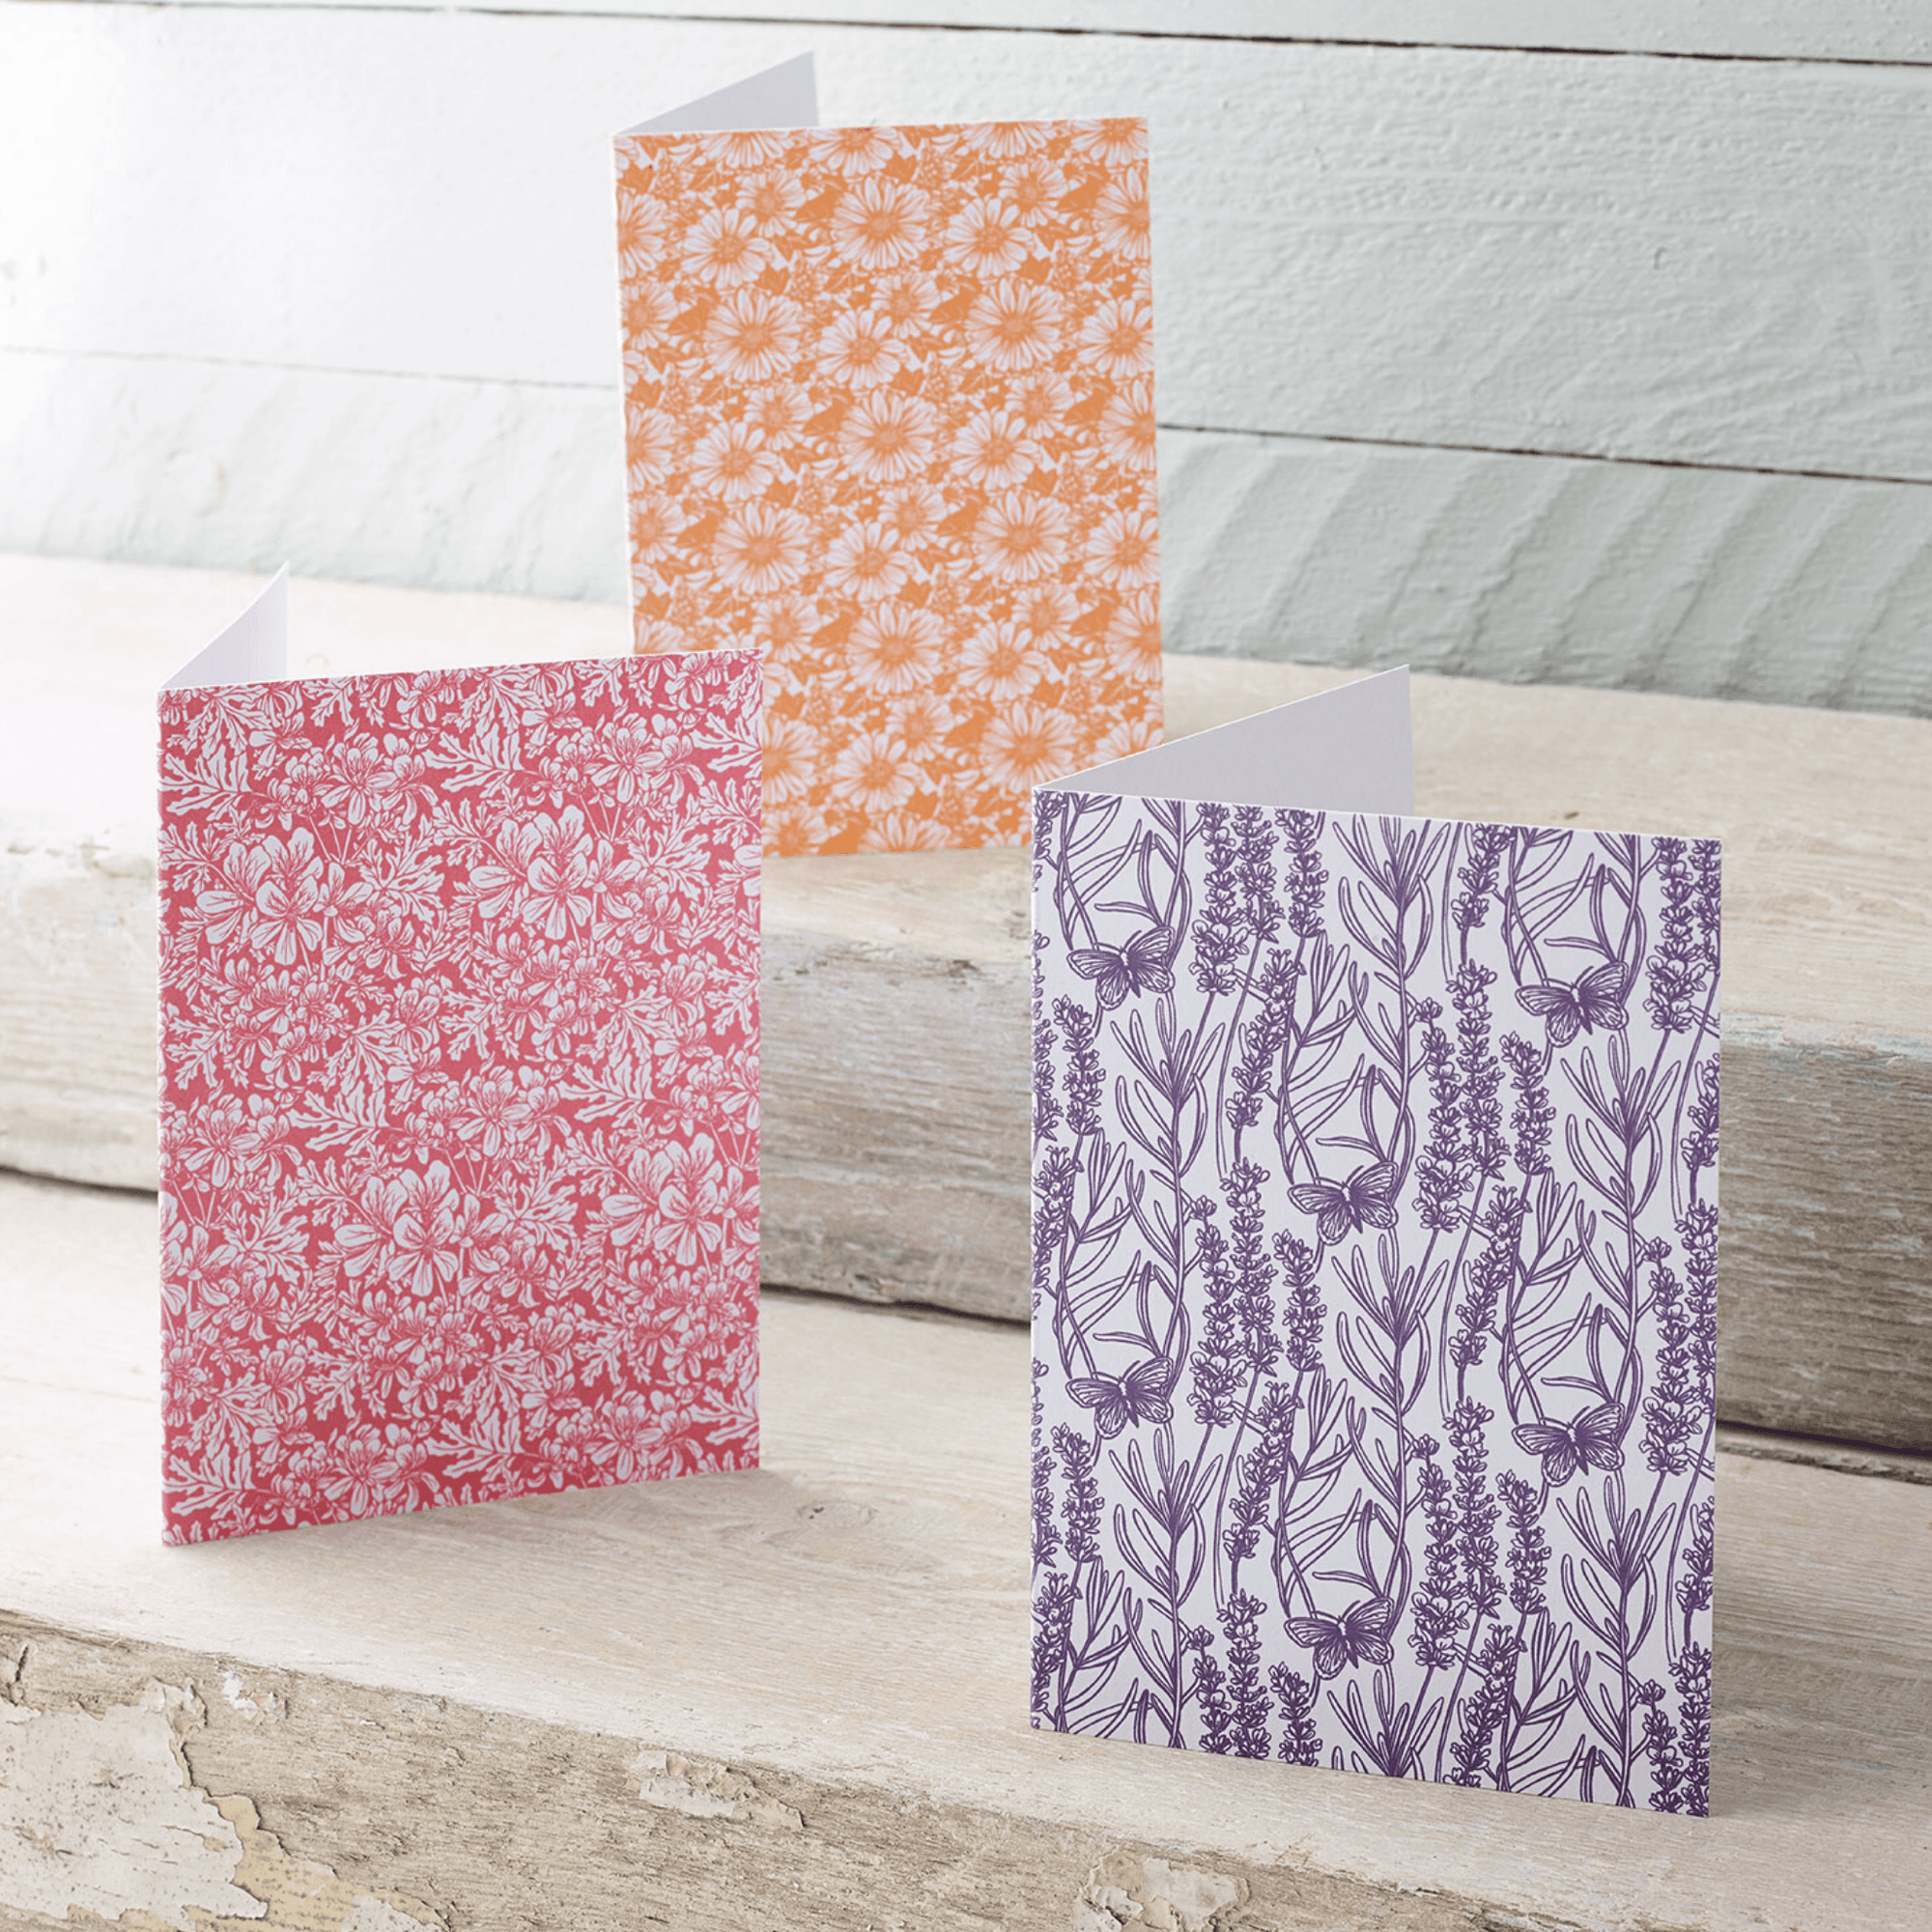 Gift Product - Blank Greeting Cards - 3 Pack